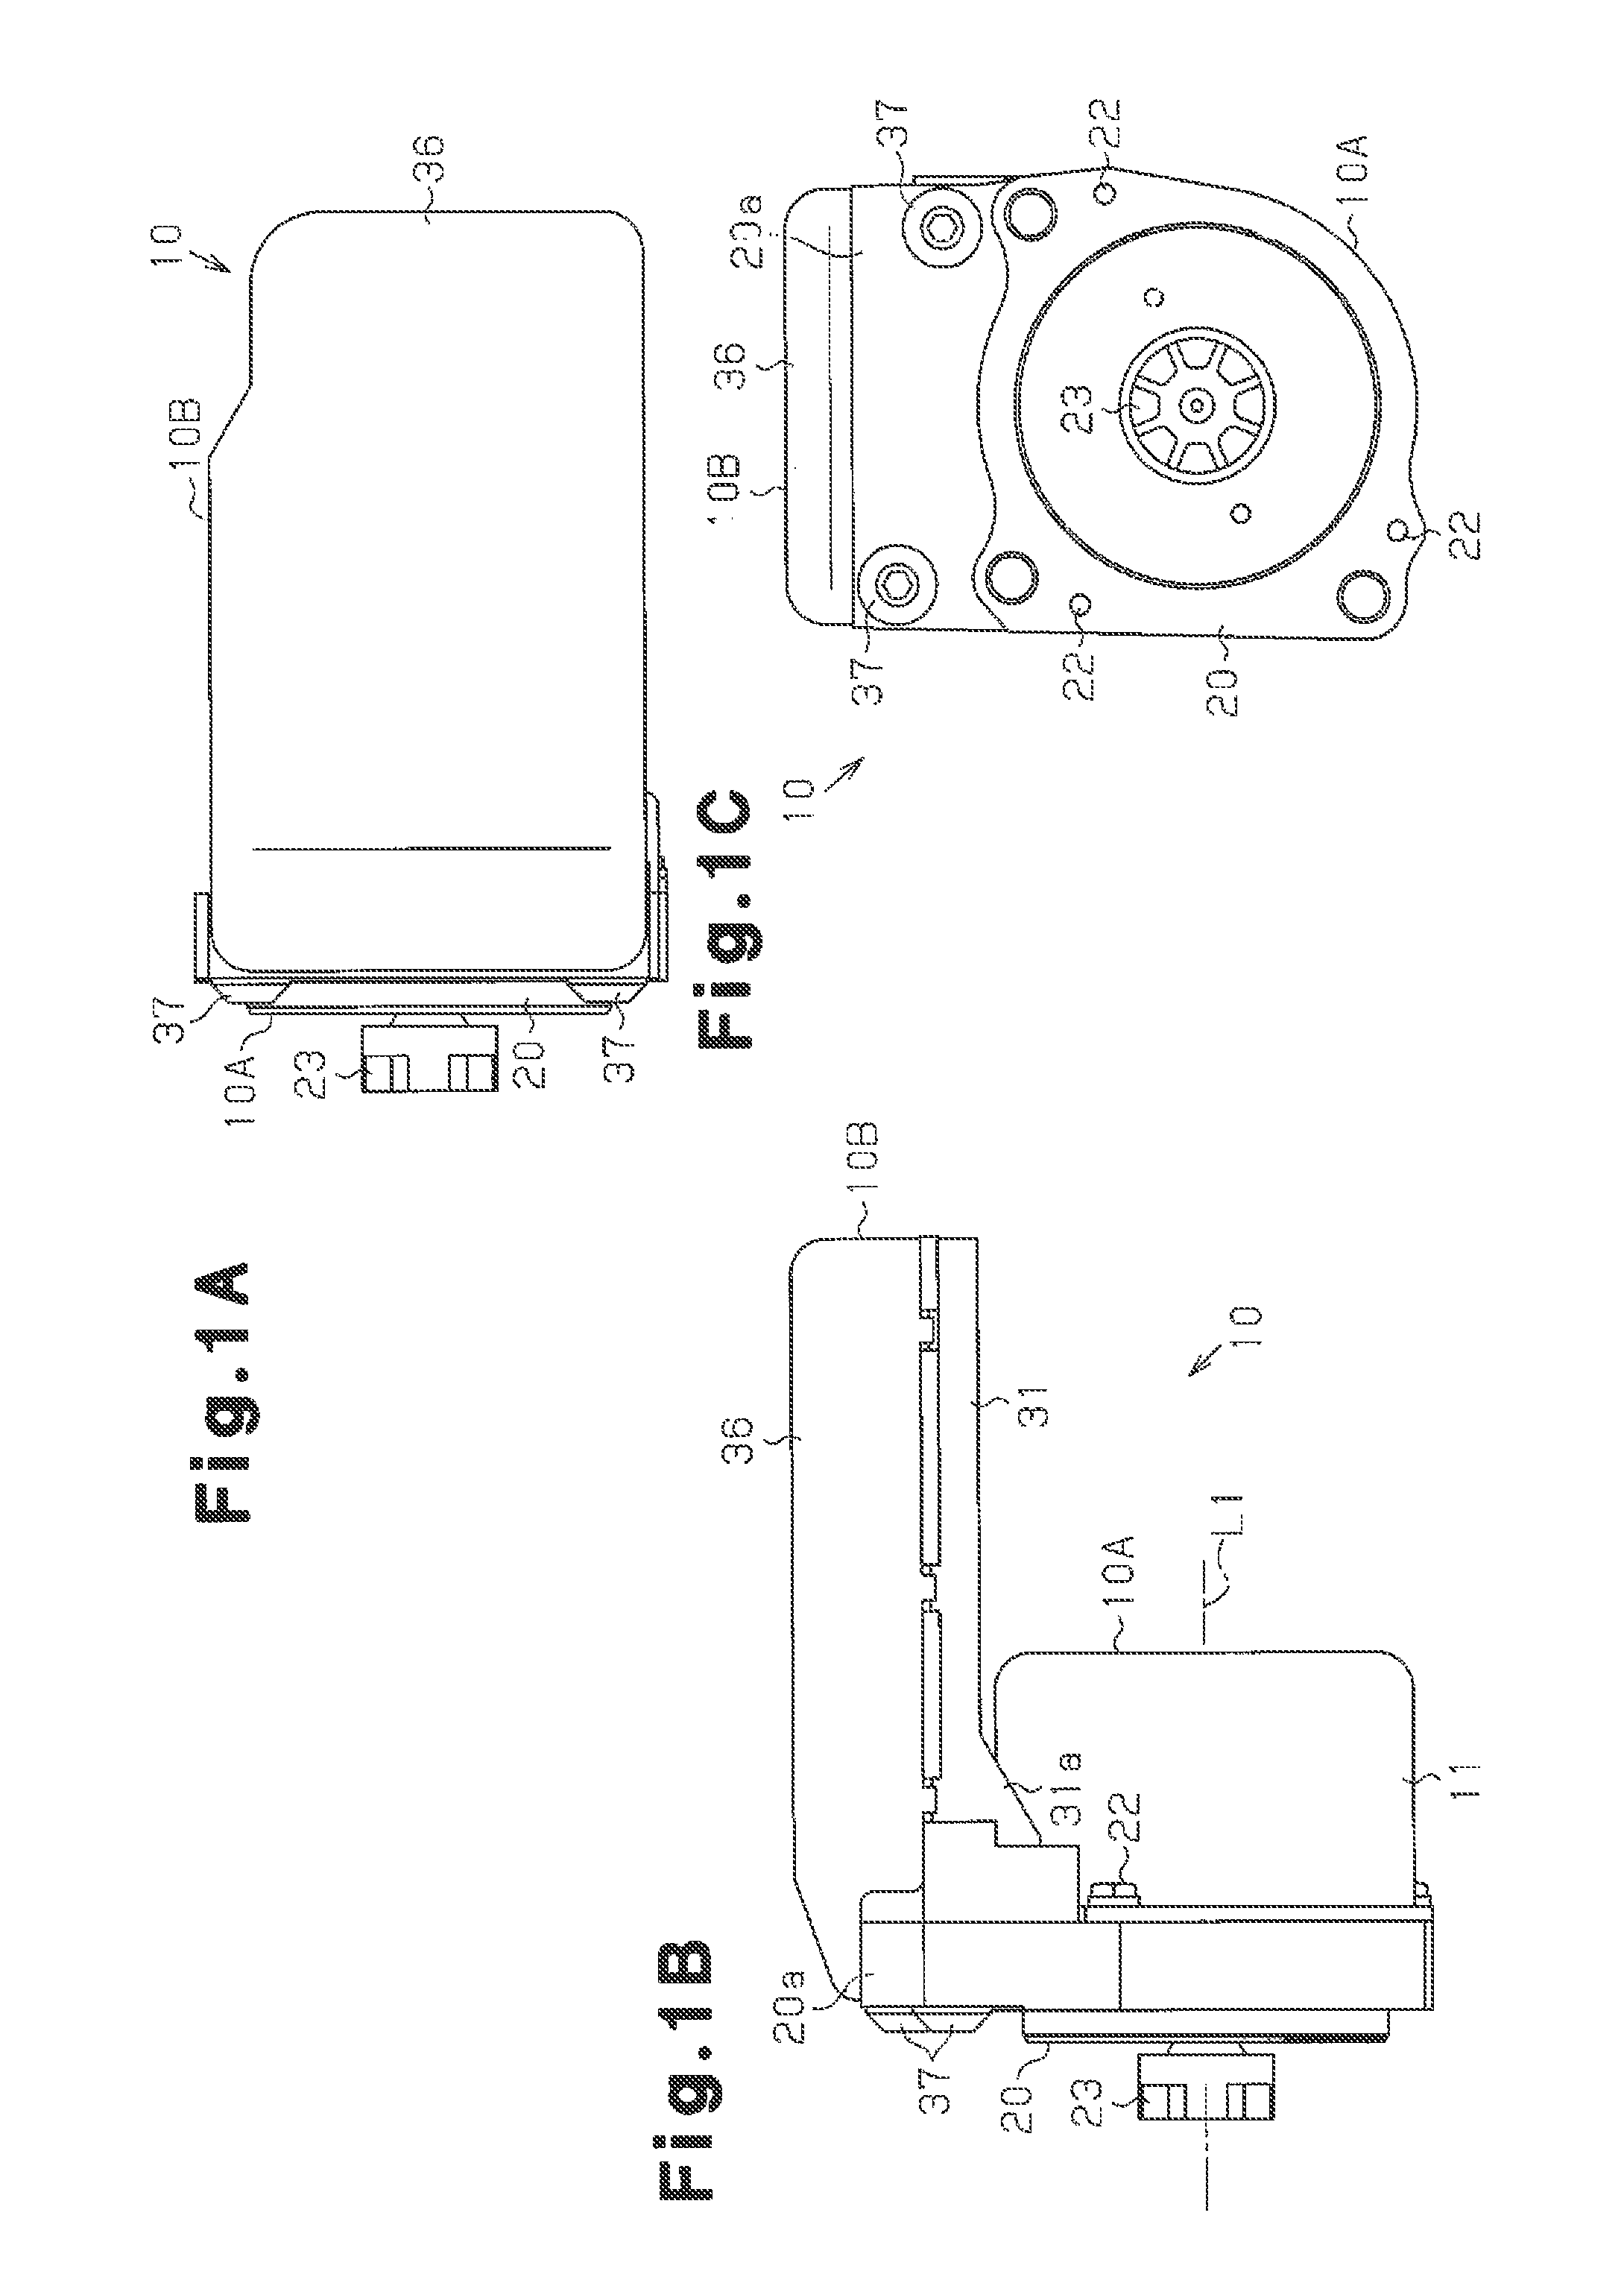 Motor and motor for electric power steering